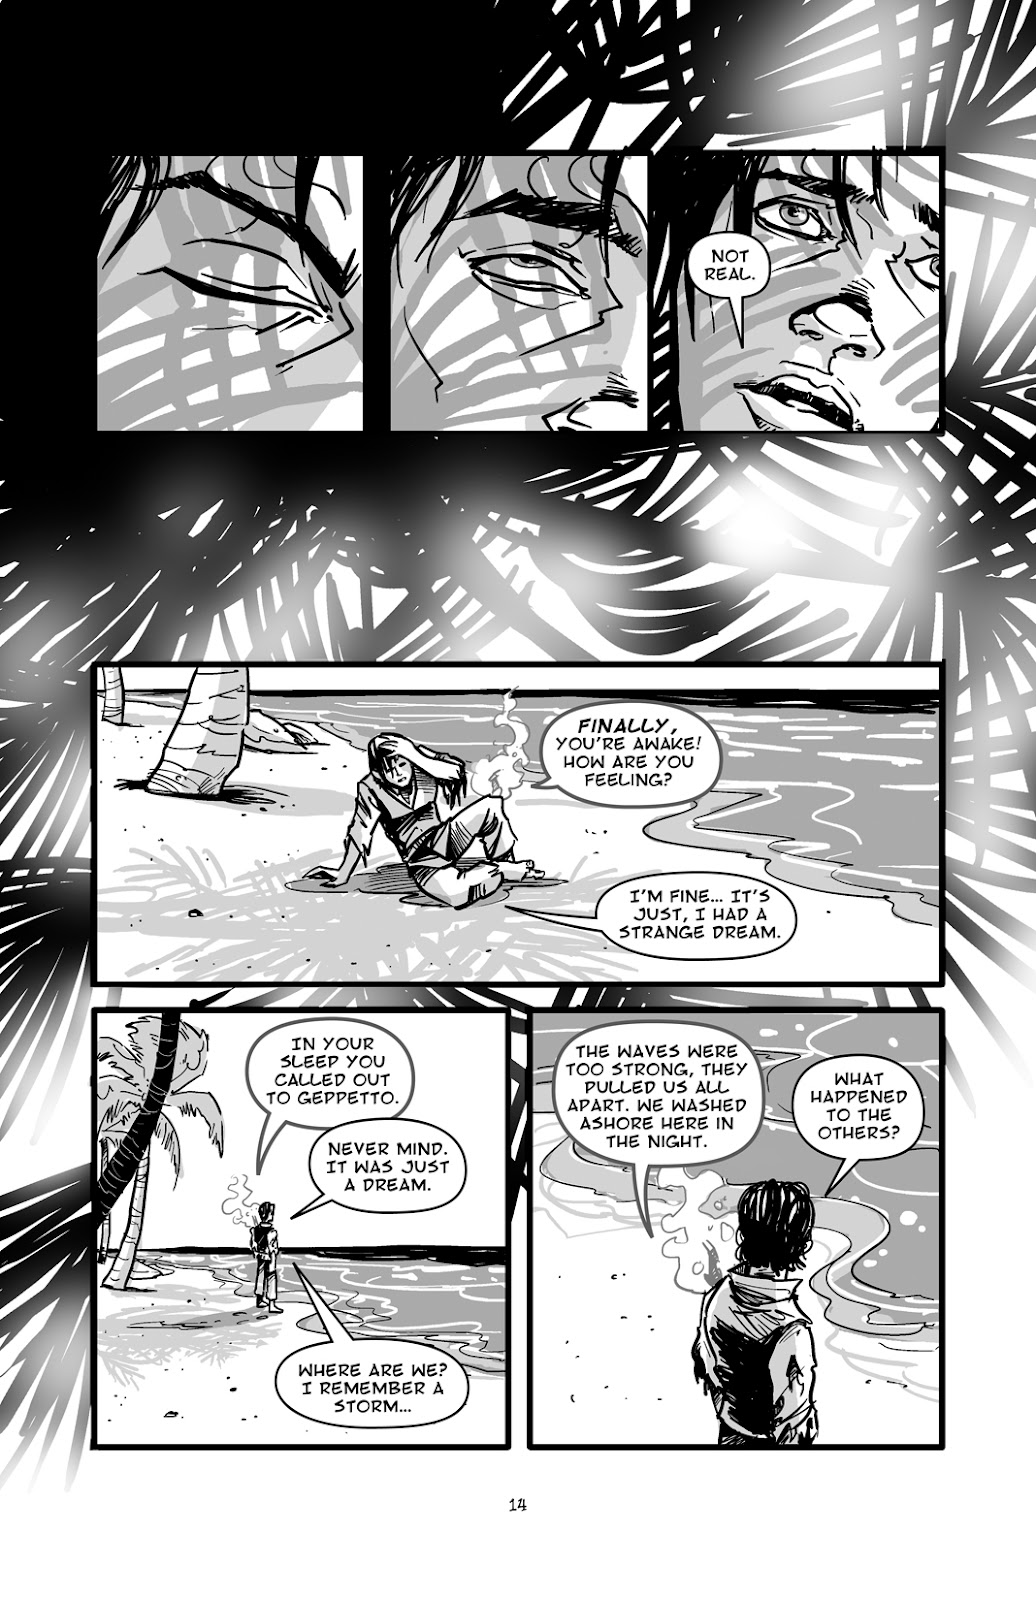 Pinocchio: Vampire Slayer - Of Wood and Blood issue 1 - Page 15